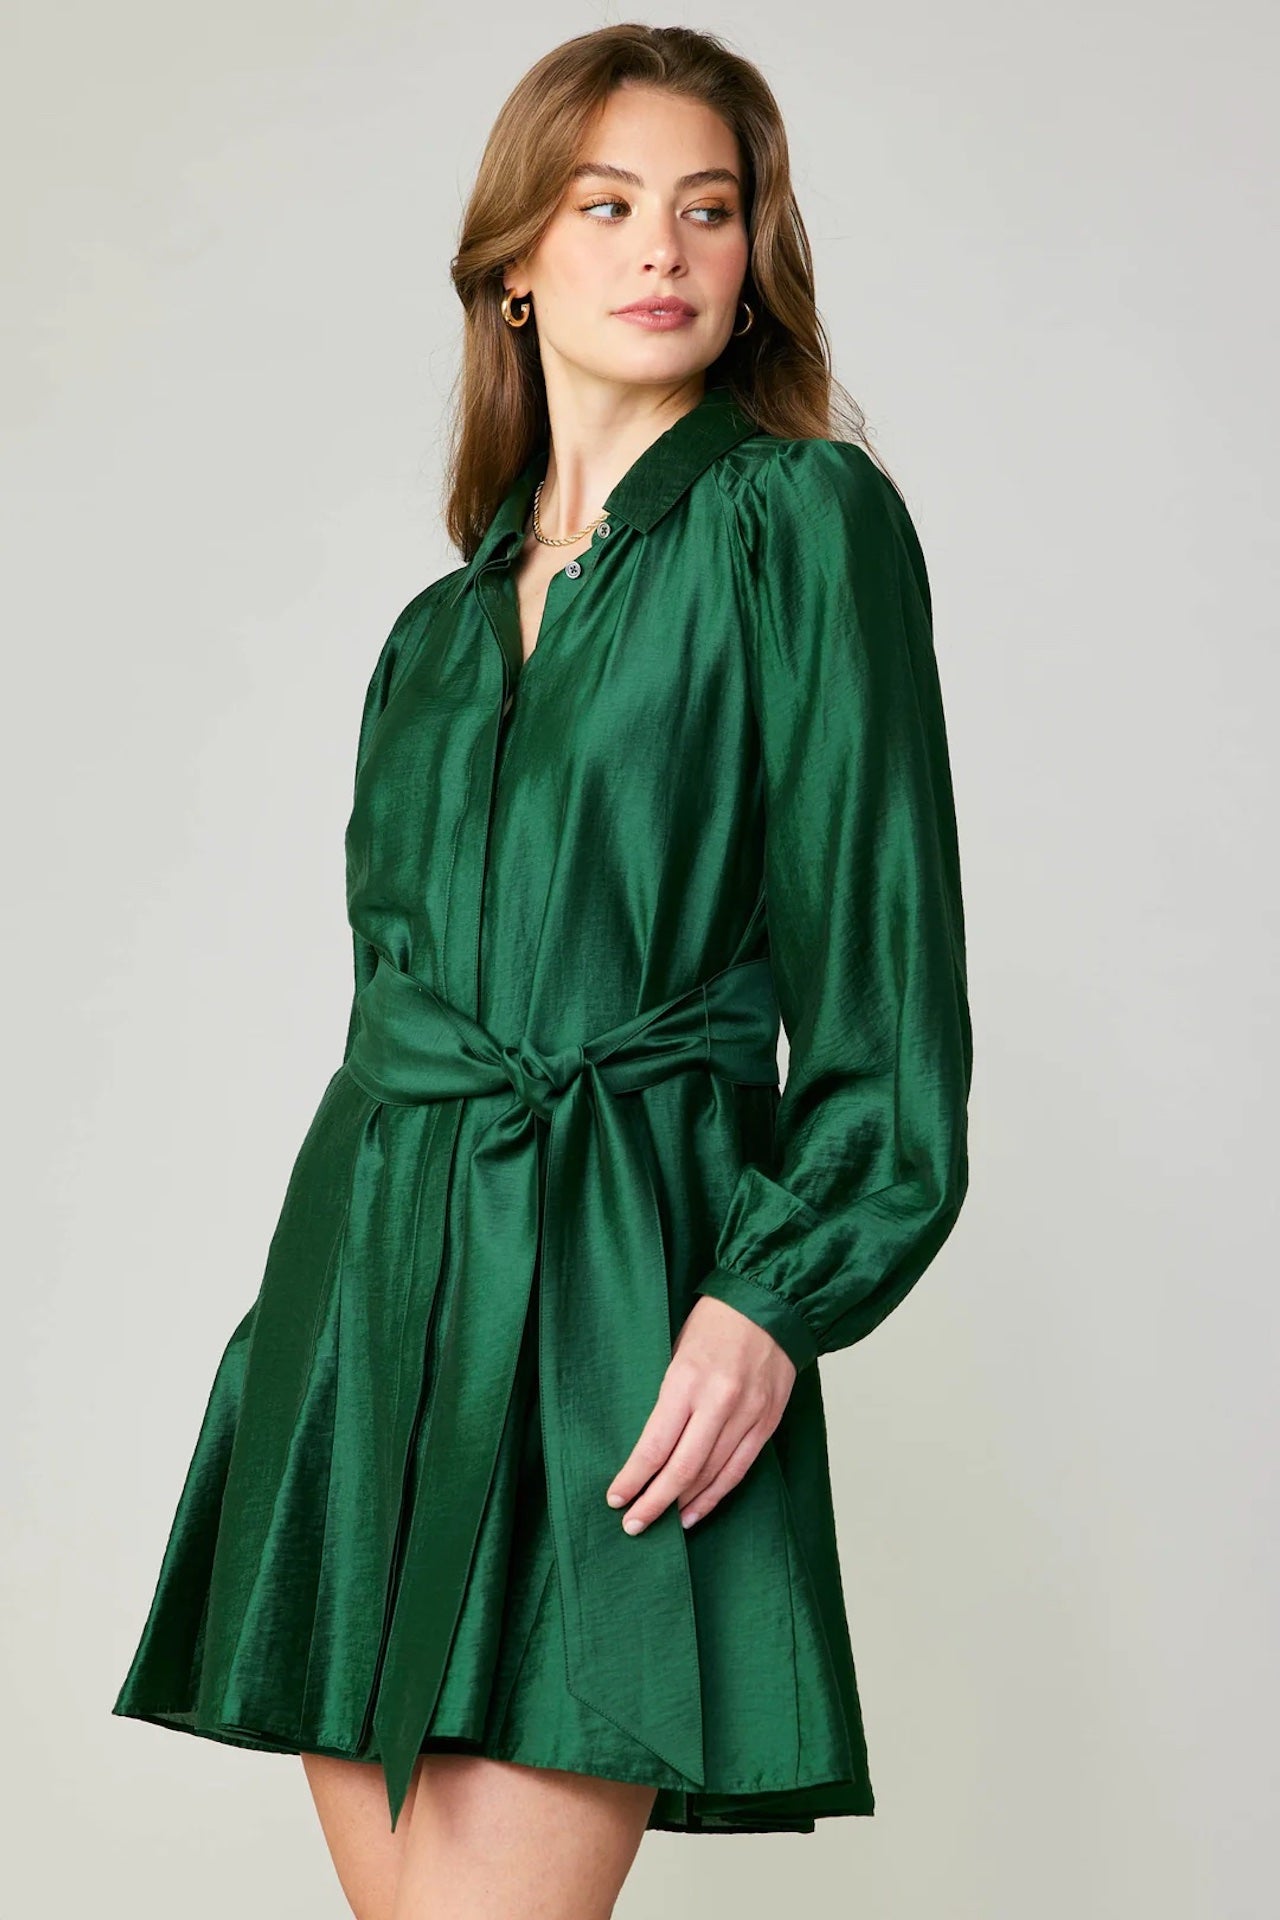 long sleeve green belted mini dress with a collar